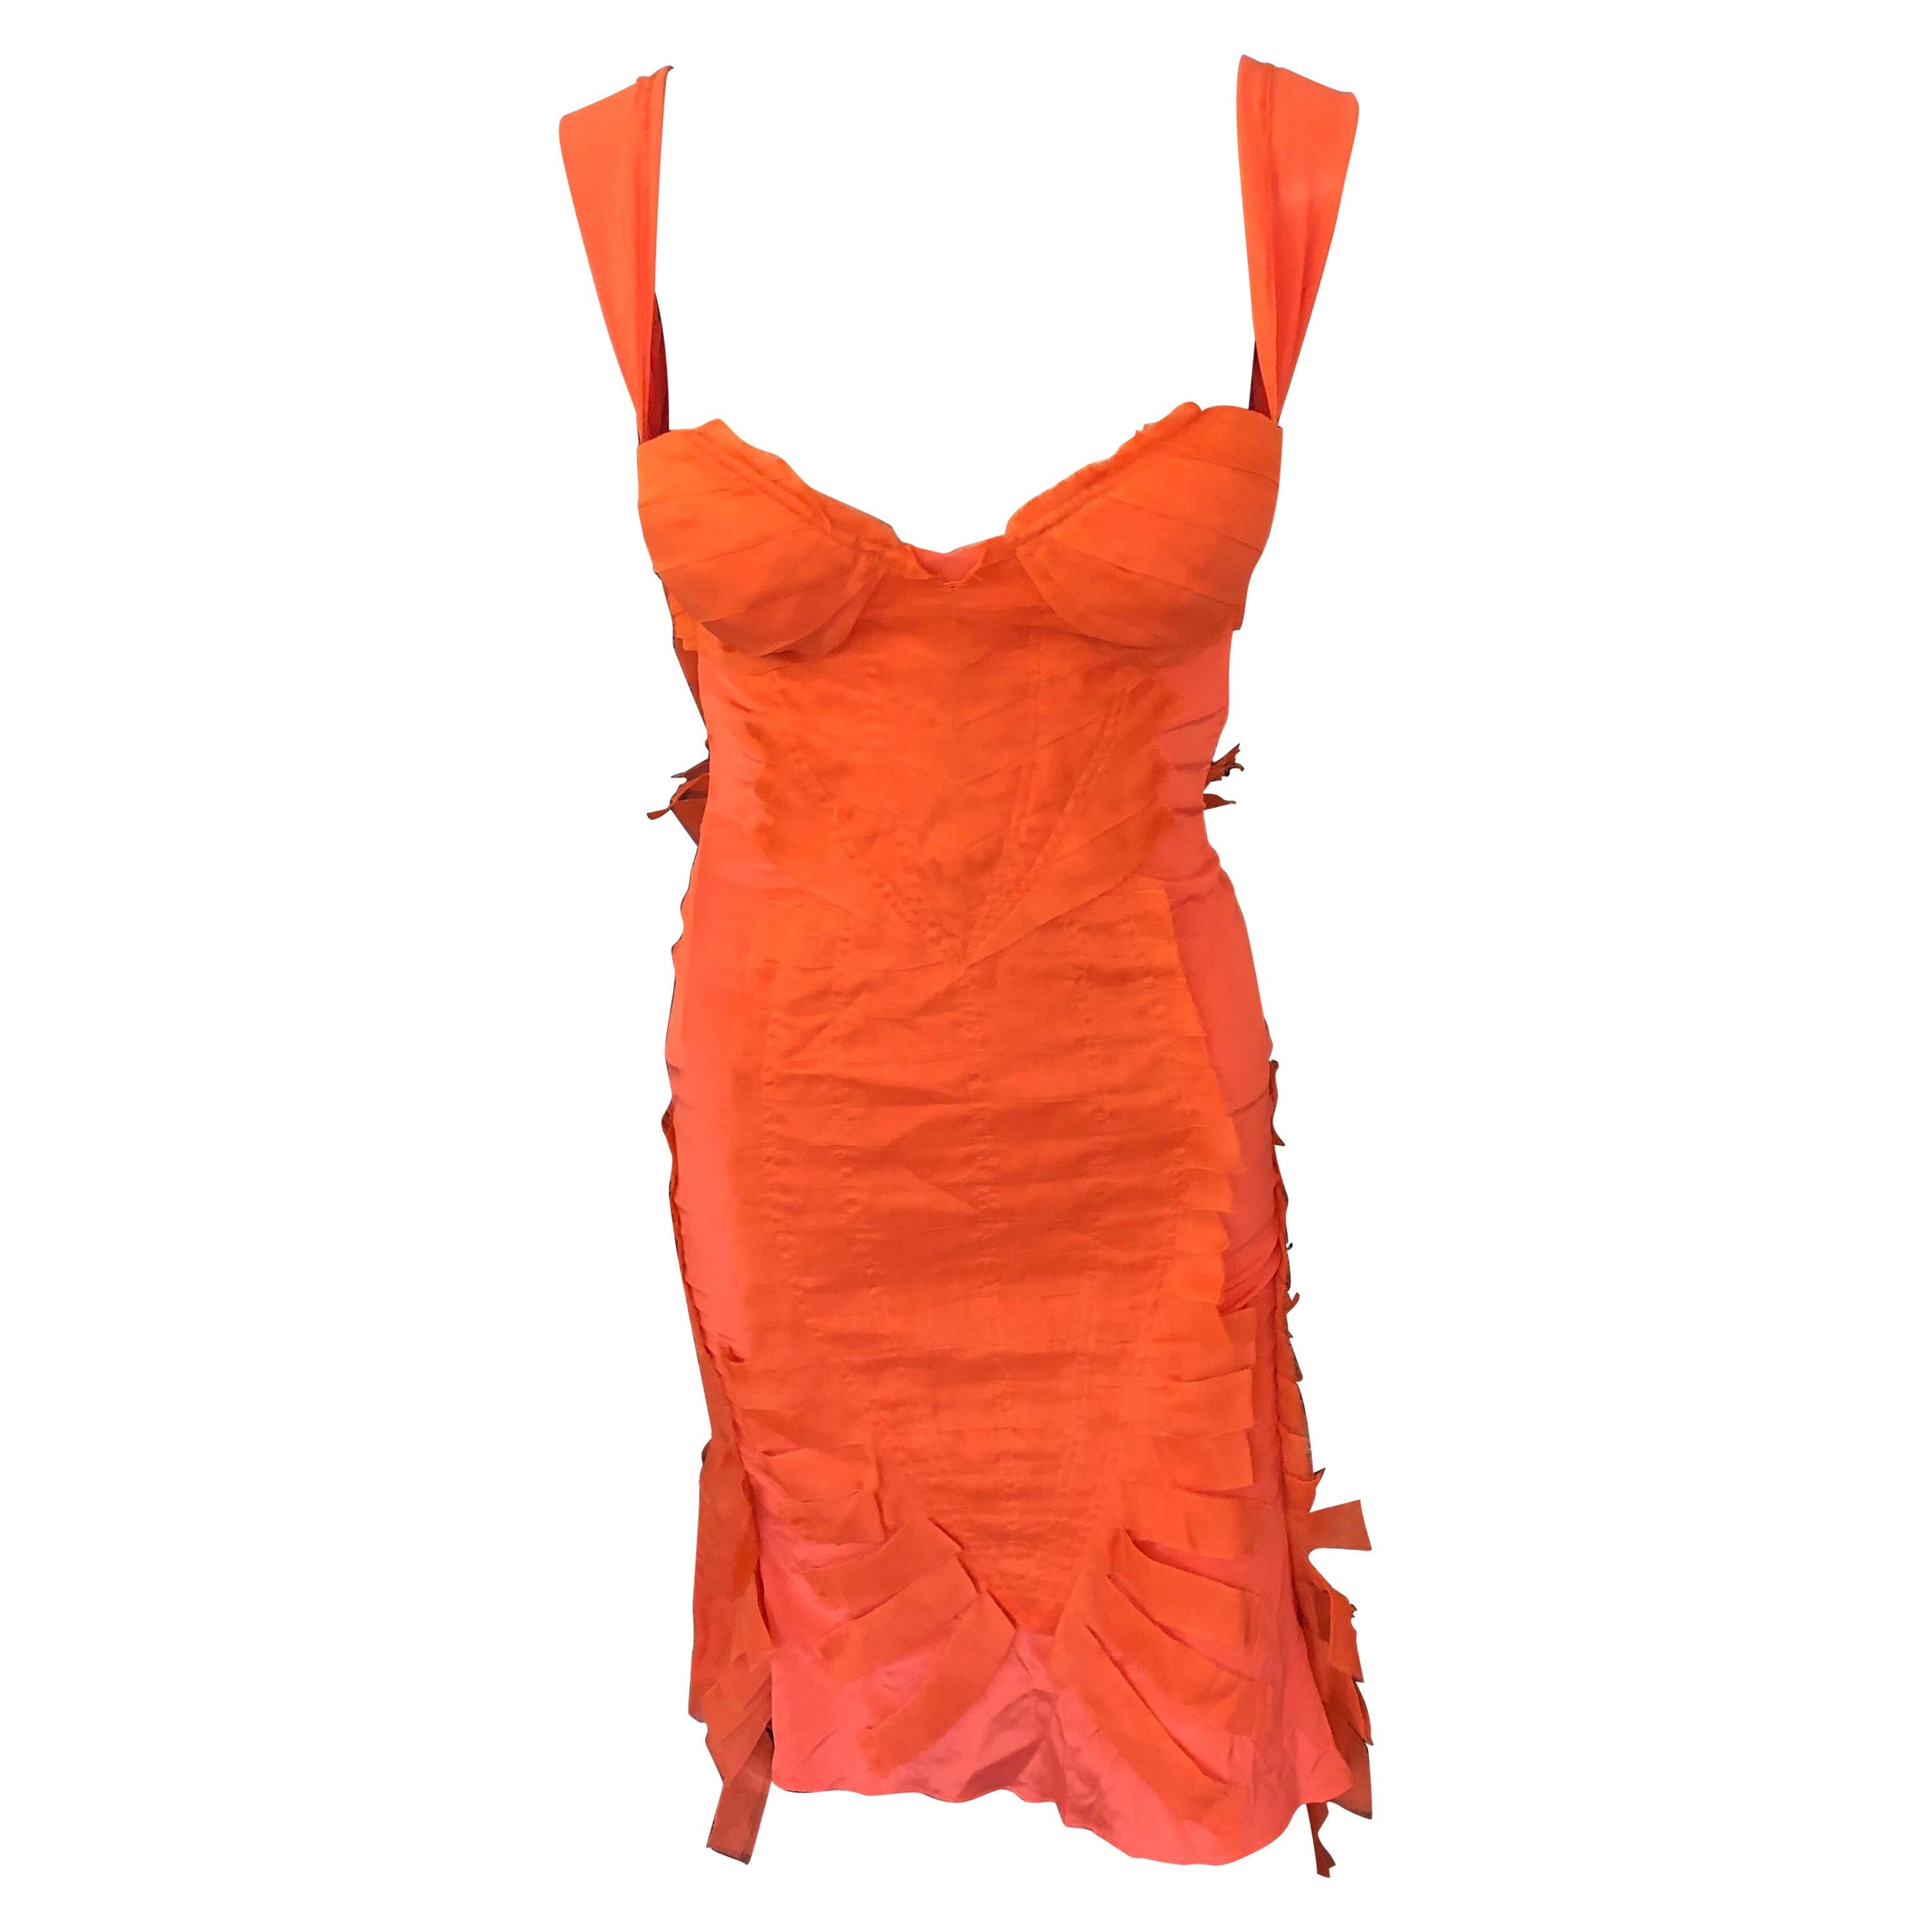 Gucci by Tom Ford S/S 2004 Runway Bustier Silk Open Back Tangerine Dress